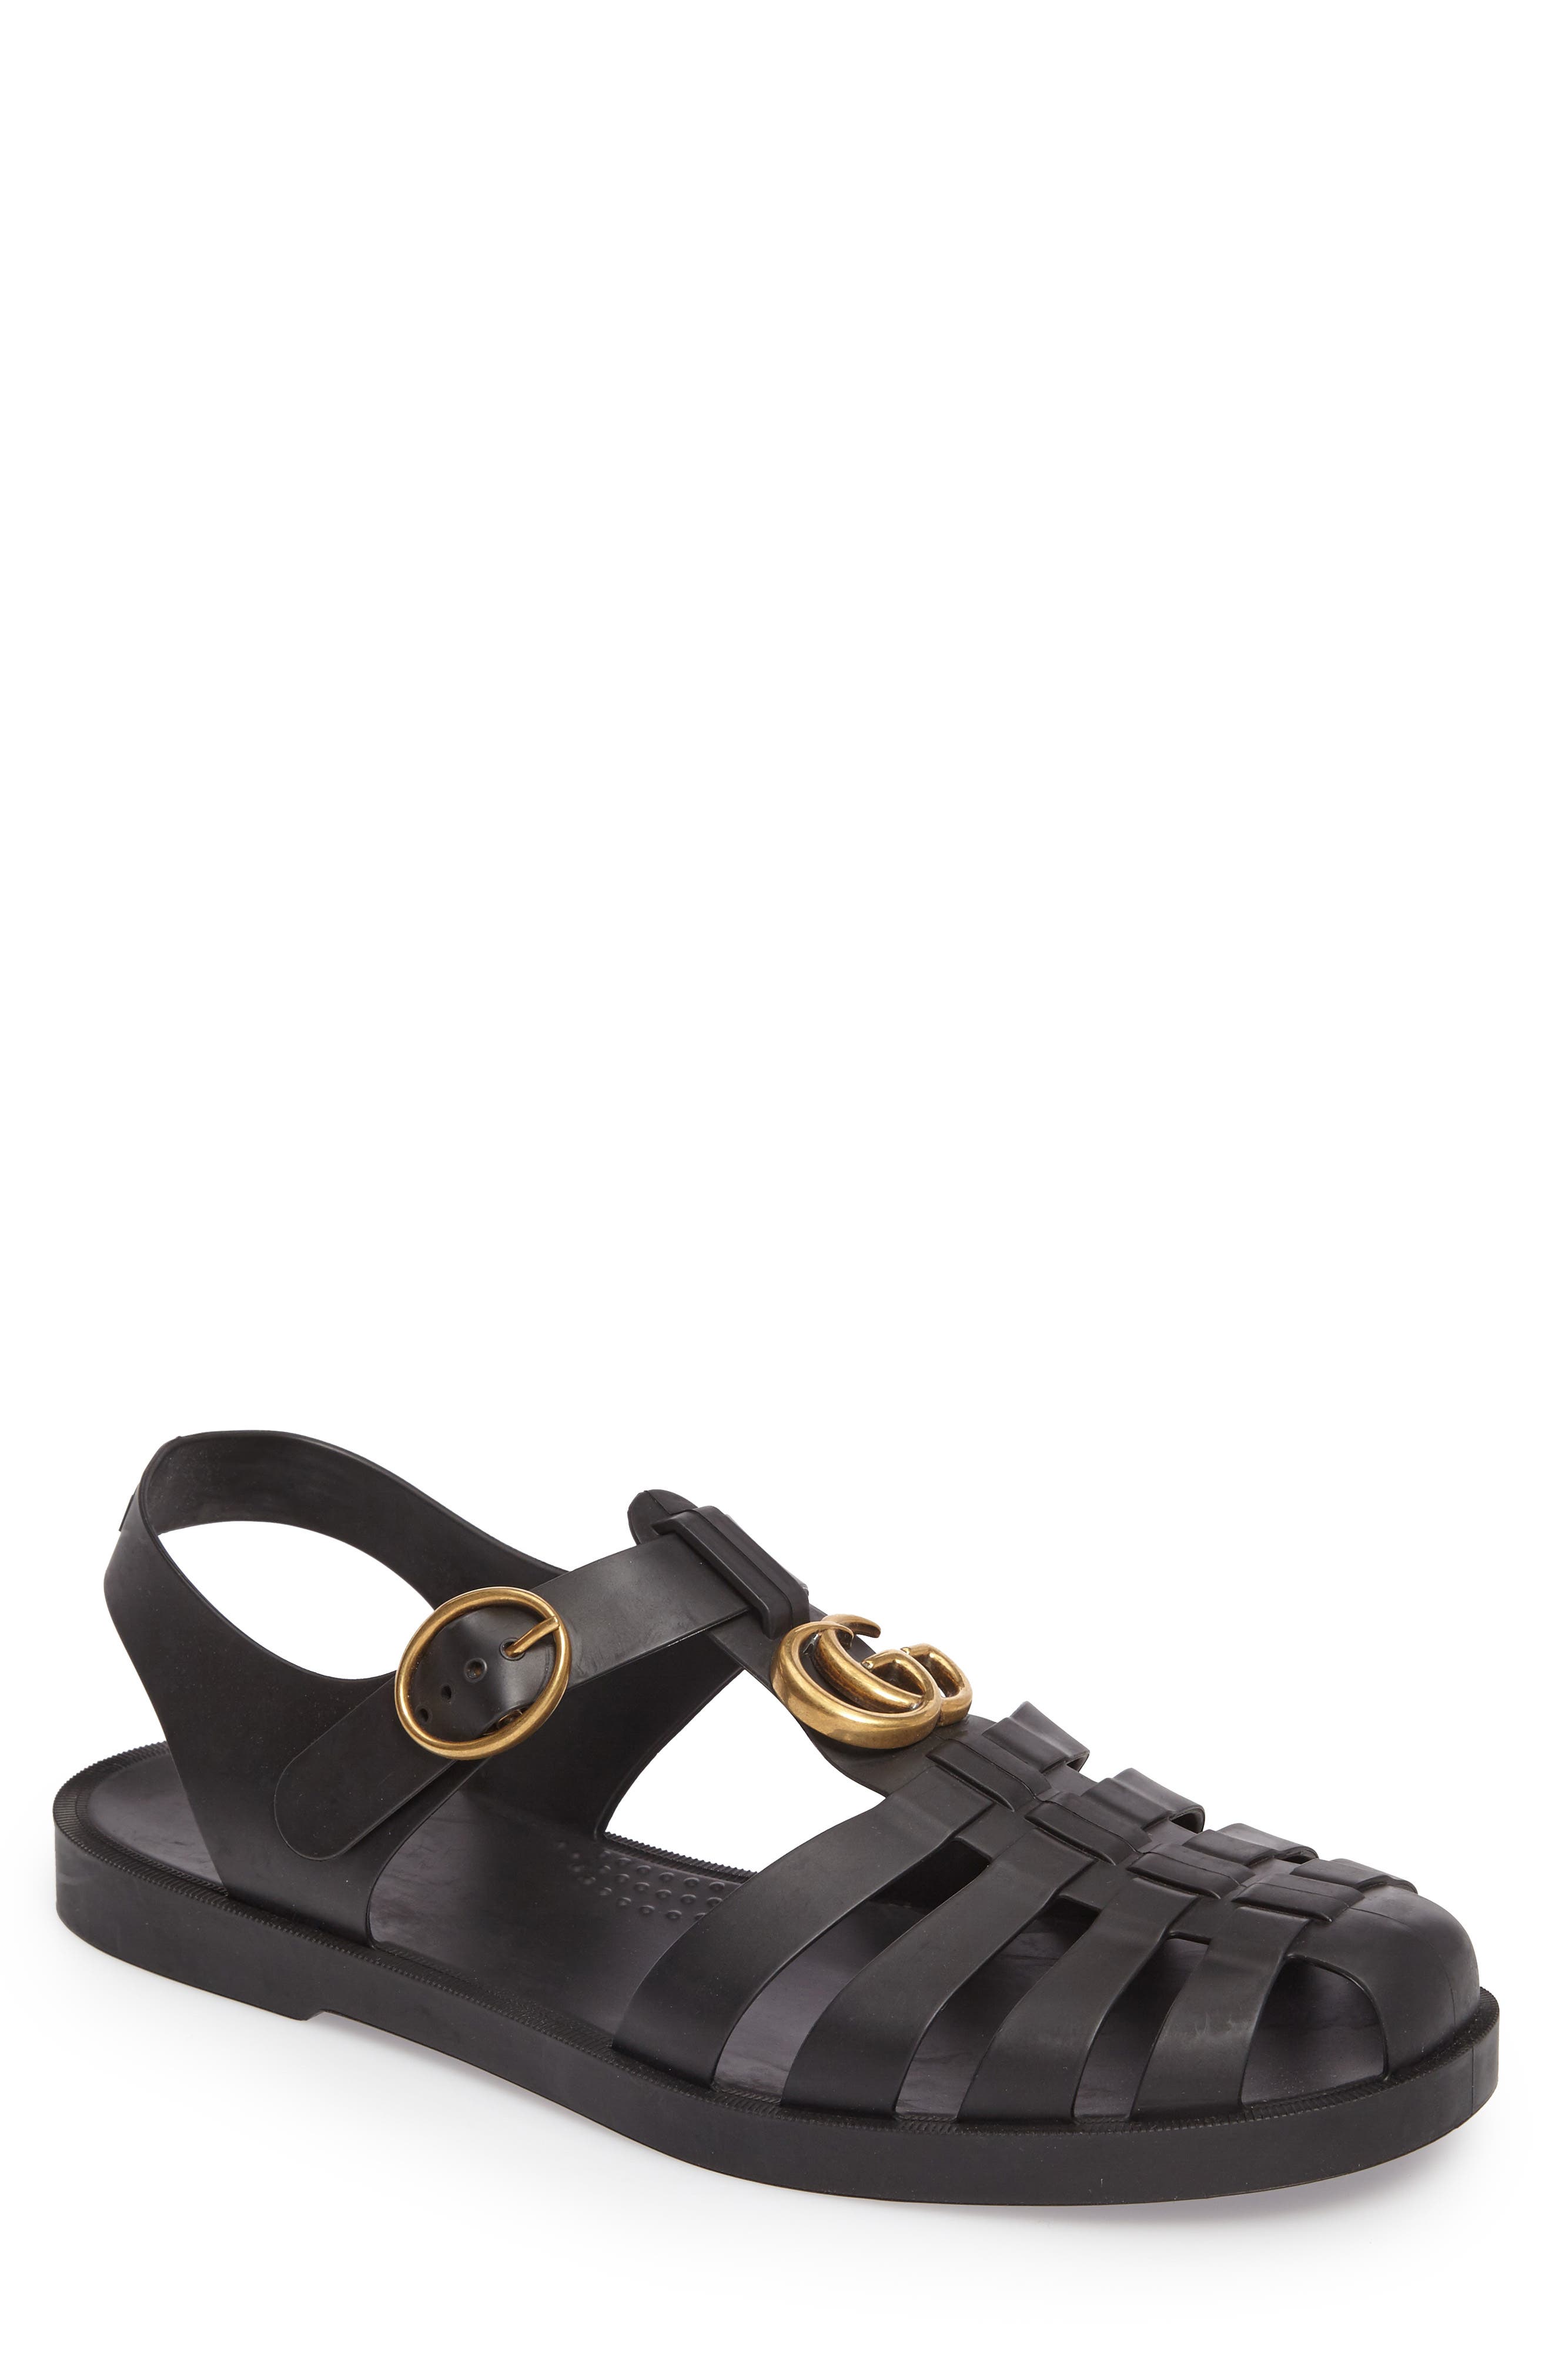 GUCCI TIGER HEAD RUBBER BUCKLE SANDALS IN BLACK | ModeSens